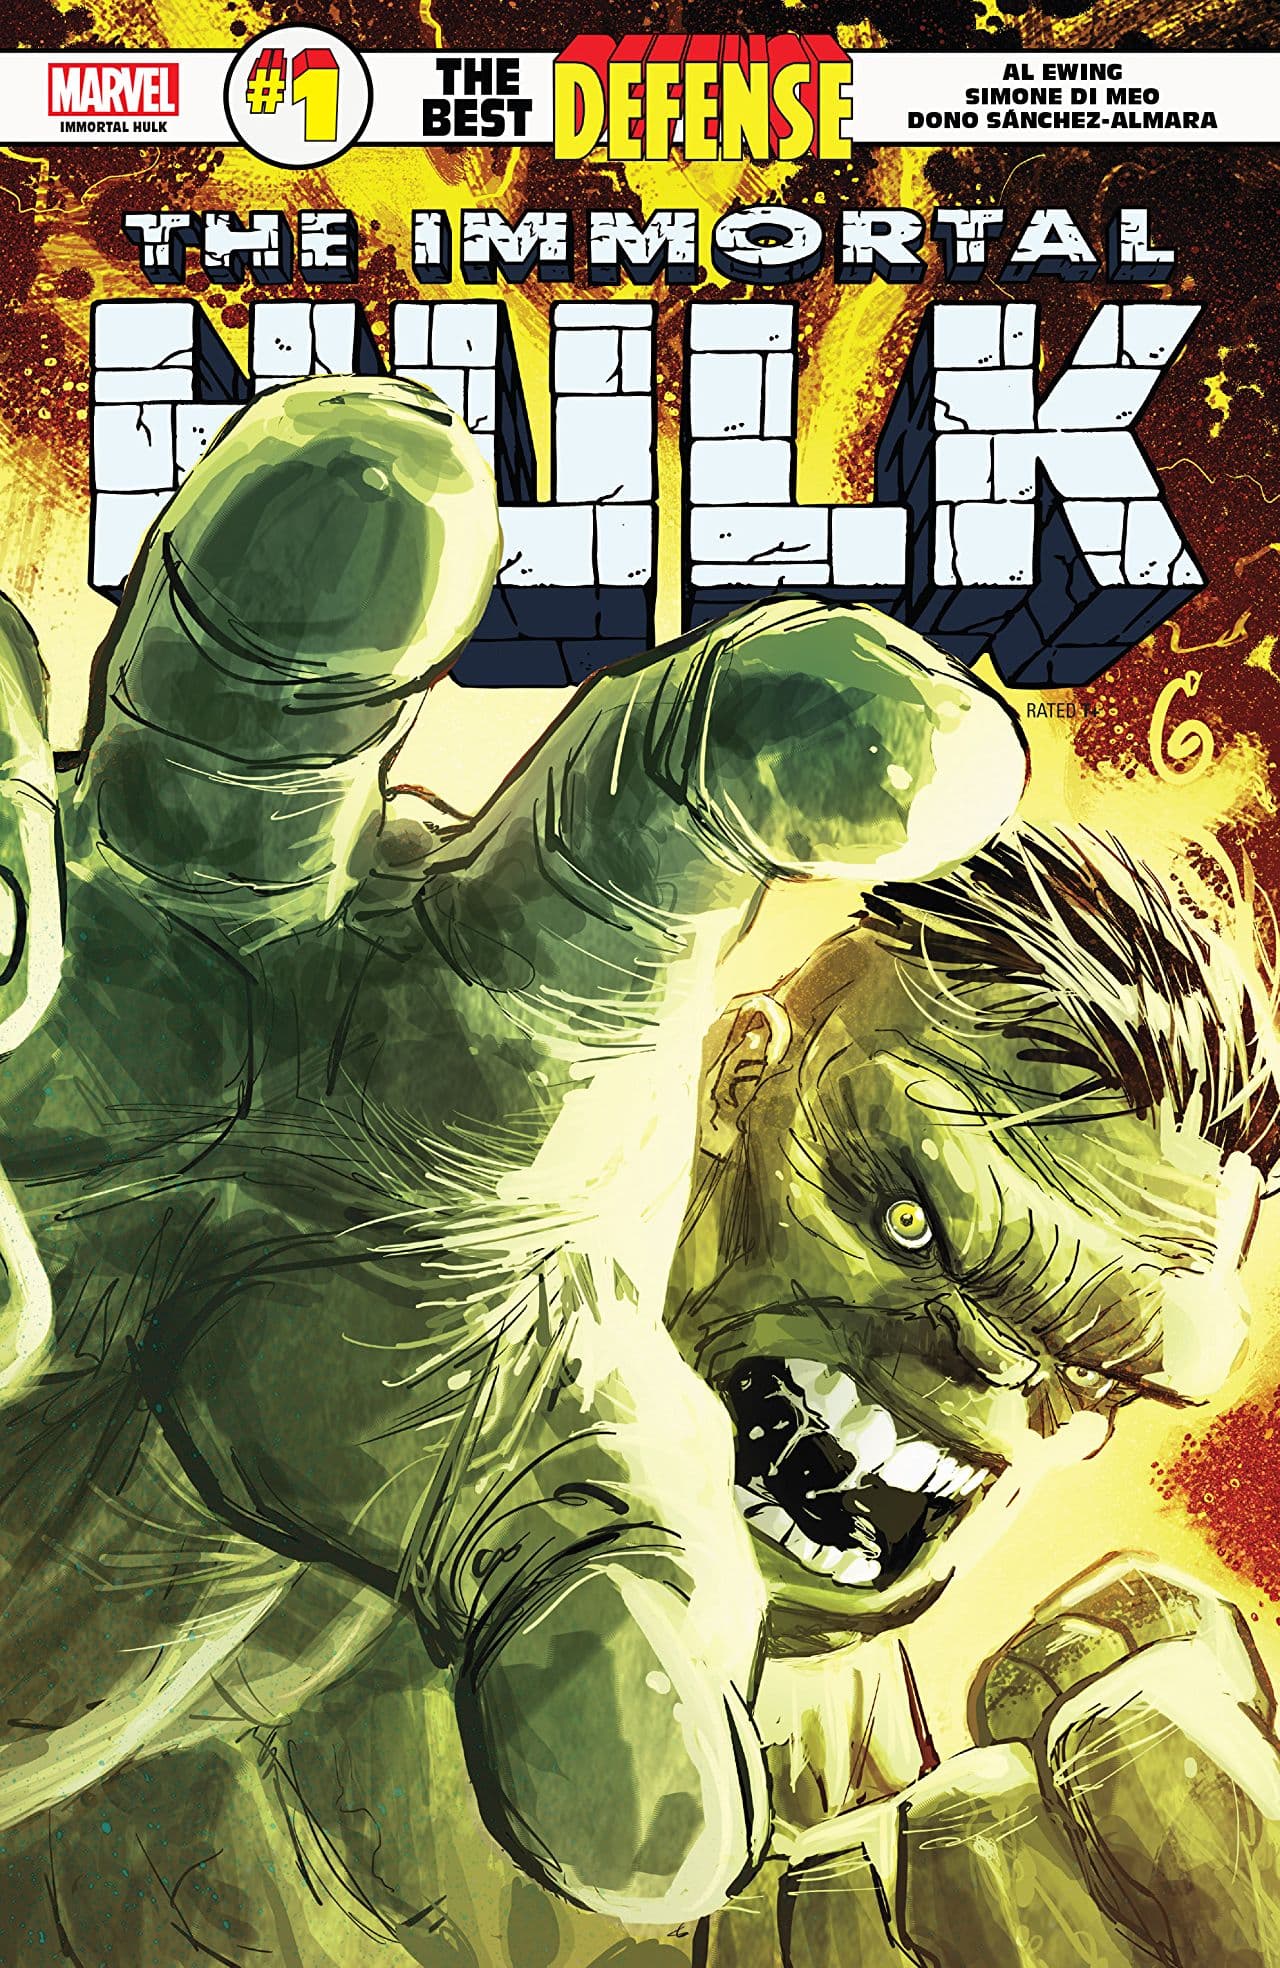 Immortal Hulk: The Best Defense #1 cover by Ron Garney